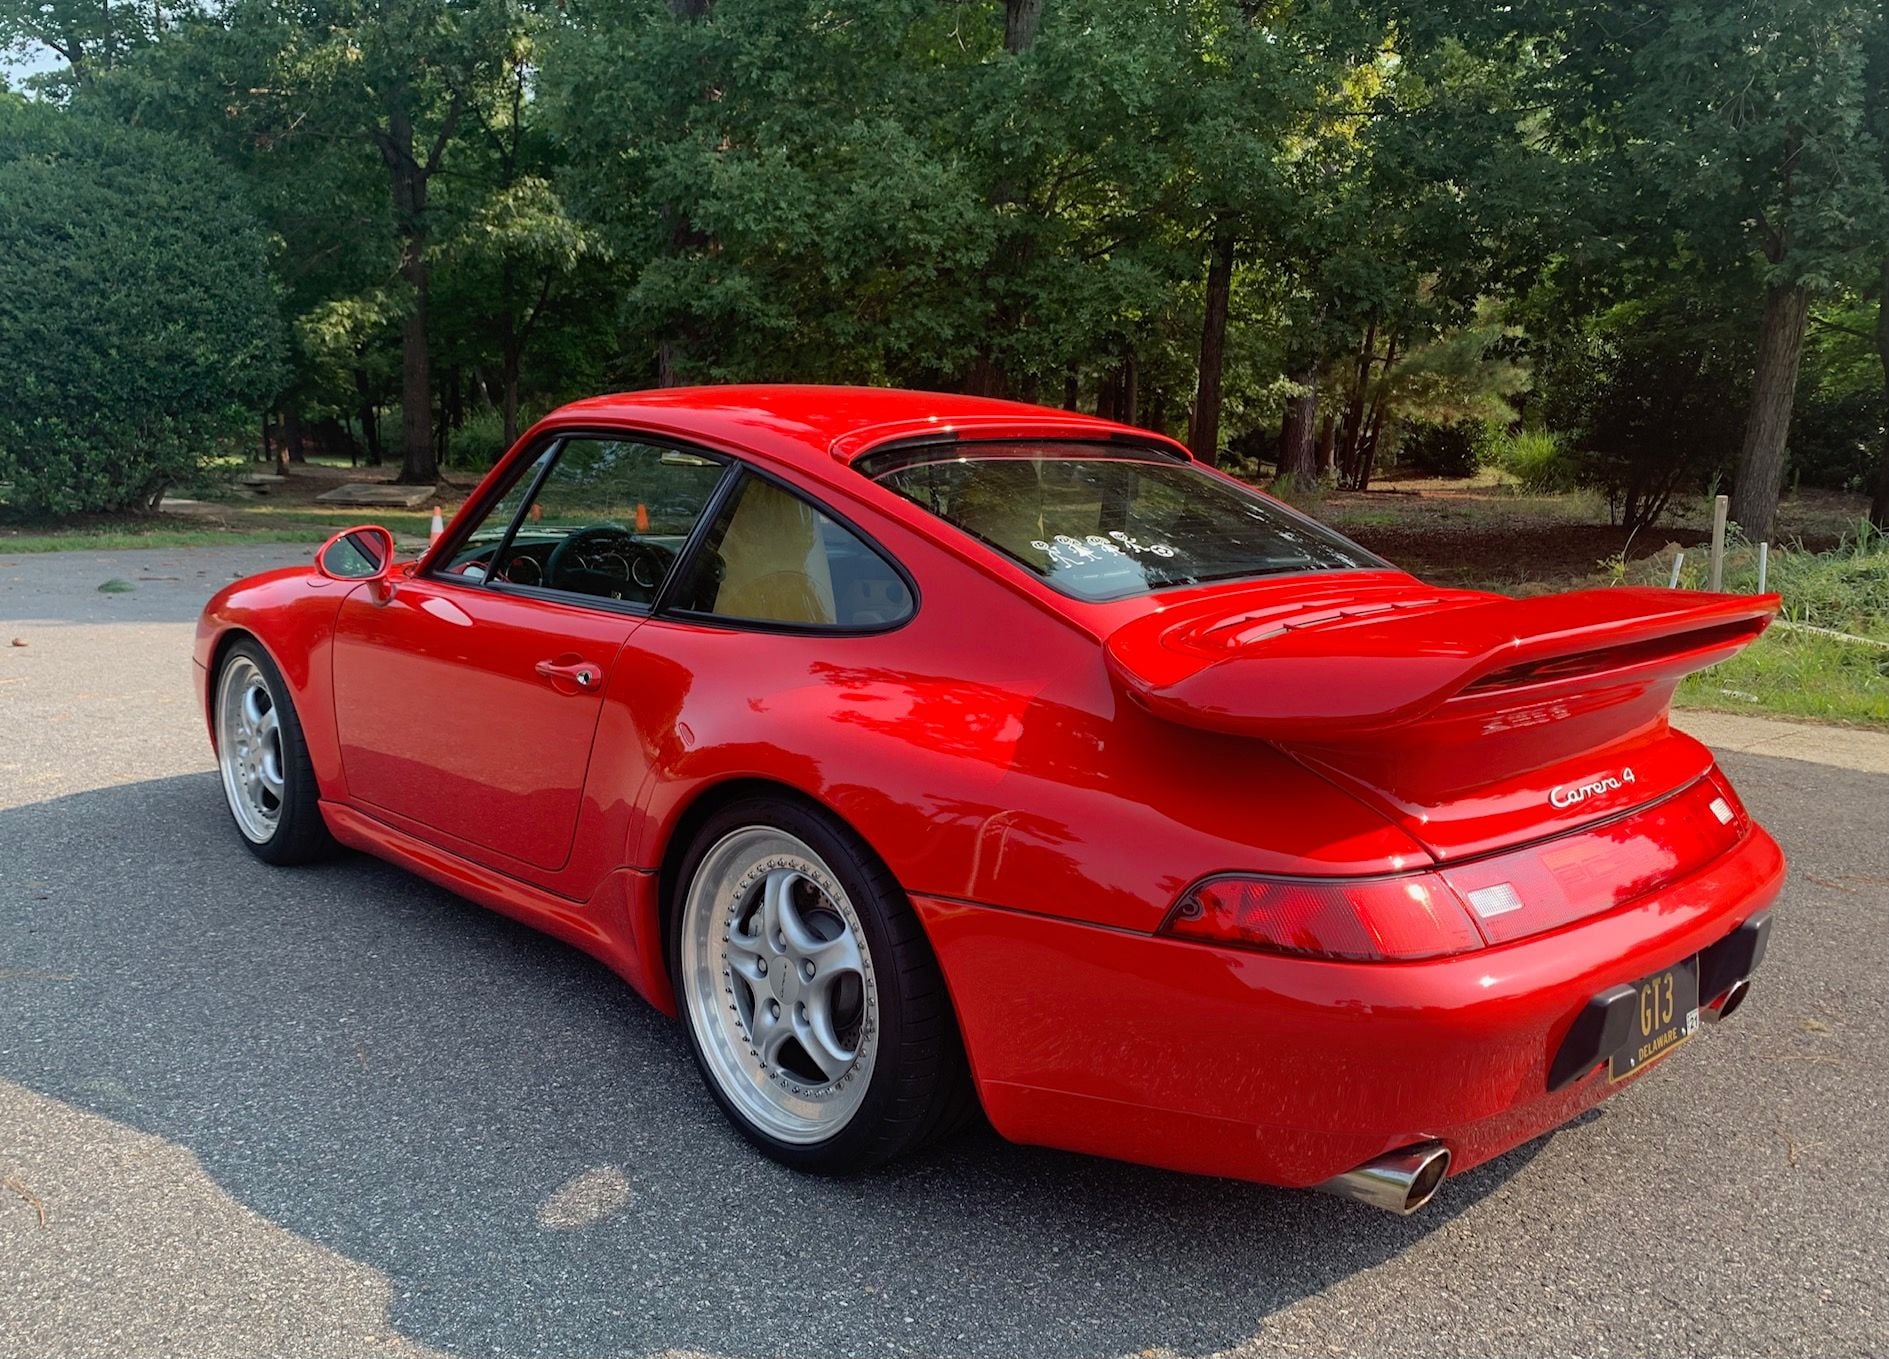 1995 Porsche 911 - 1995 Porsche 993C4 TPC Supercharger 49K miles - Used - VIN WP0AA2991SS324032 - 49,850 Miles - 6 cyl - AWD - Manual - Coupe - Red - Williamsburg, VA 23185, United States